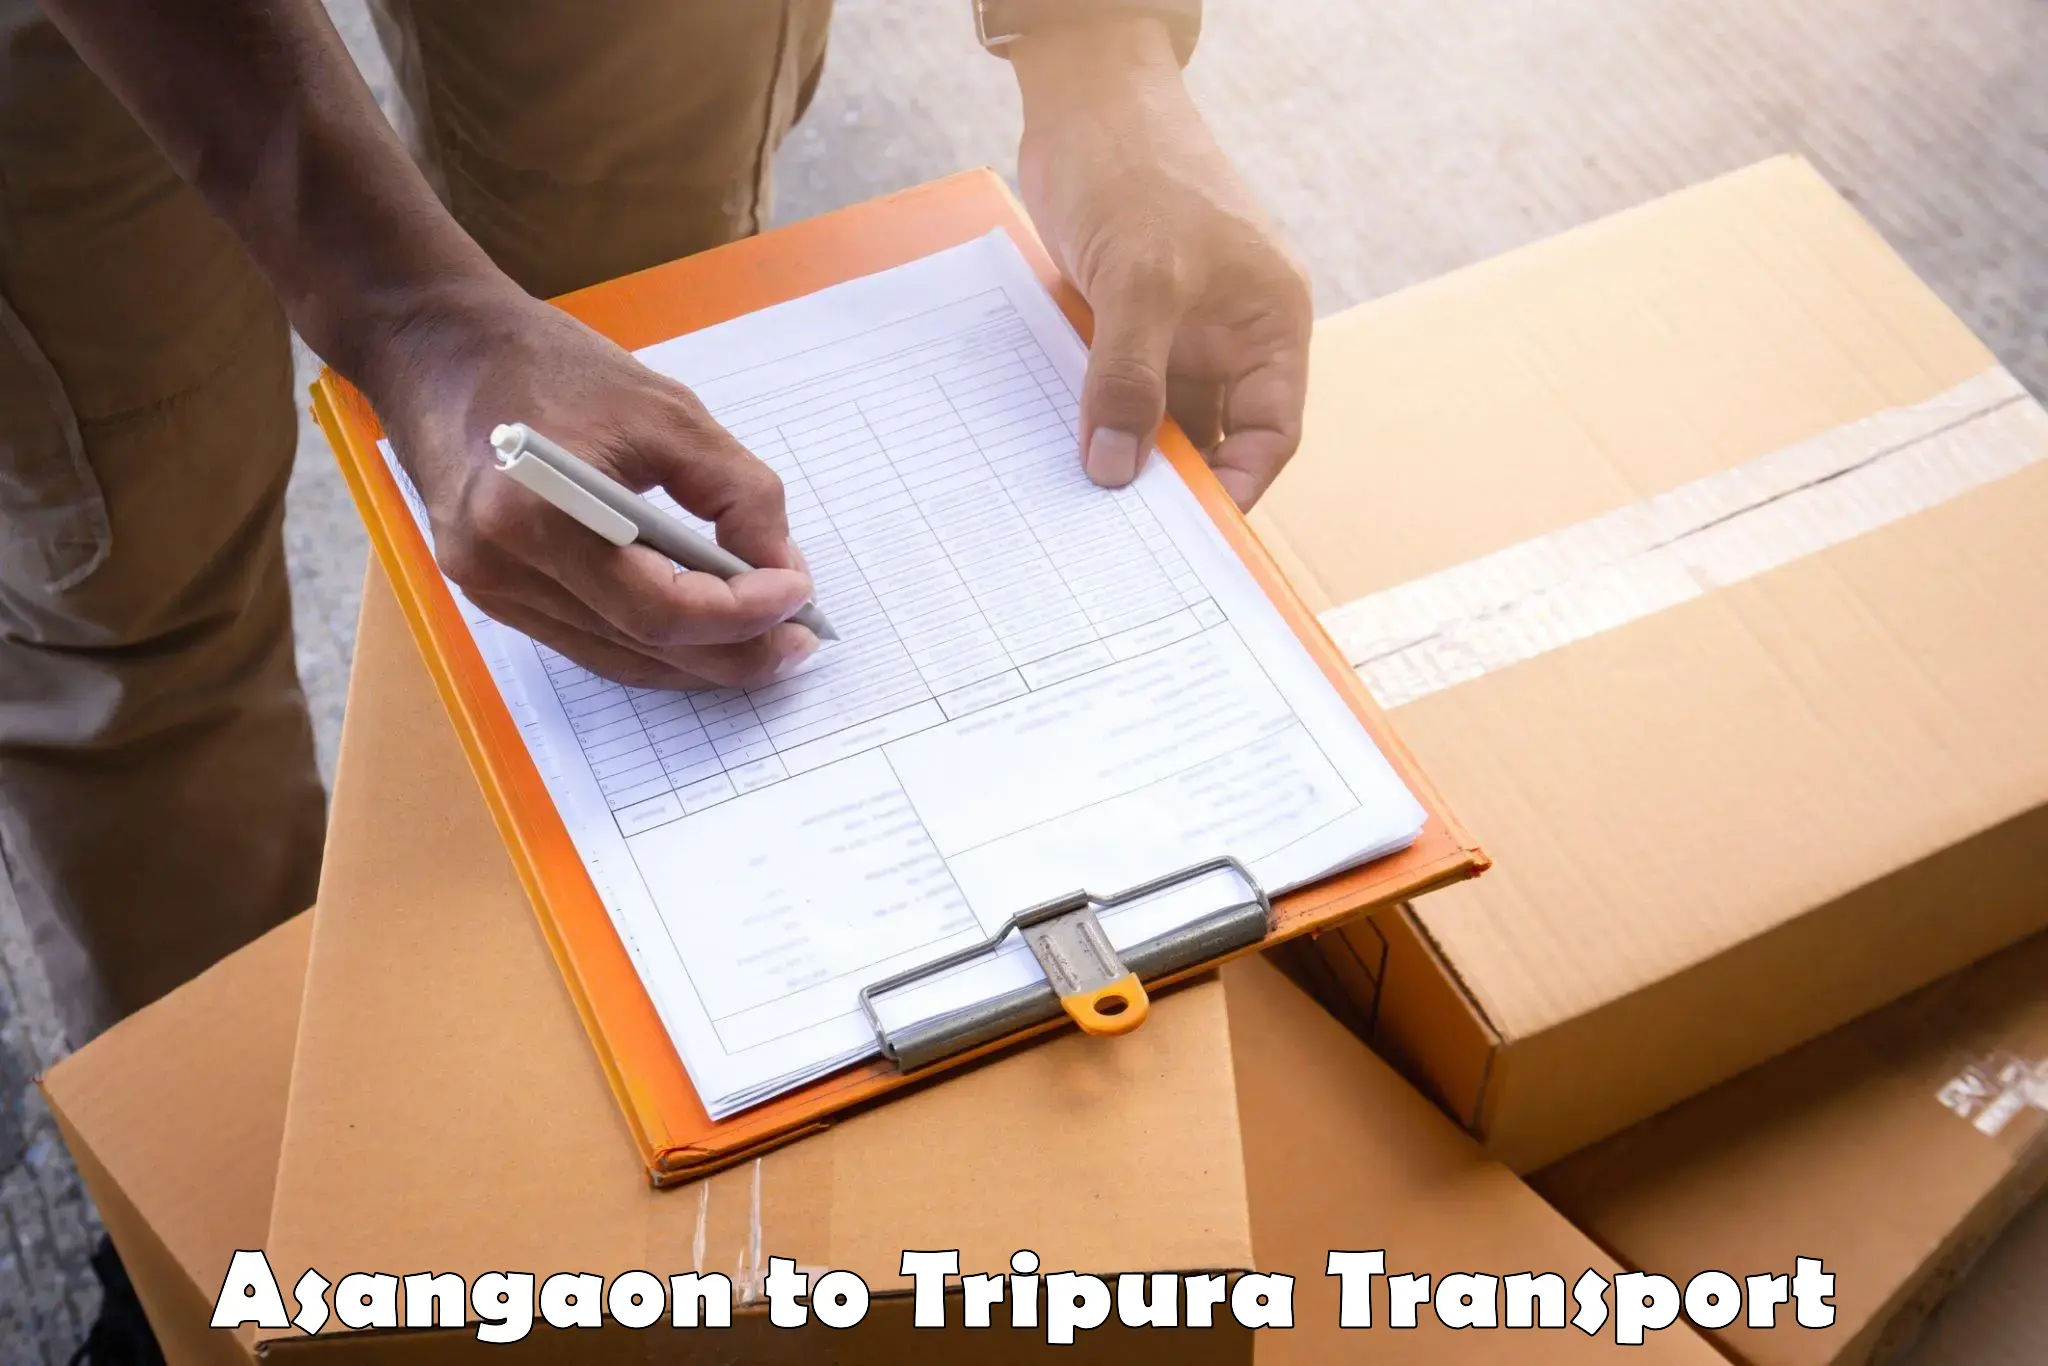 Express transport services in Asangaon to North Tripura